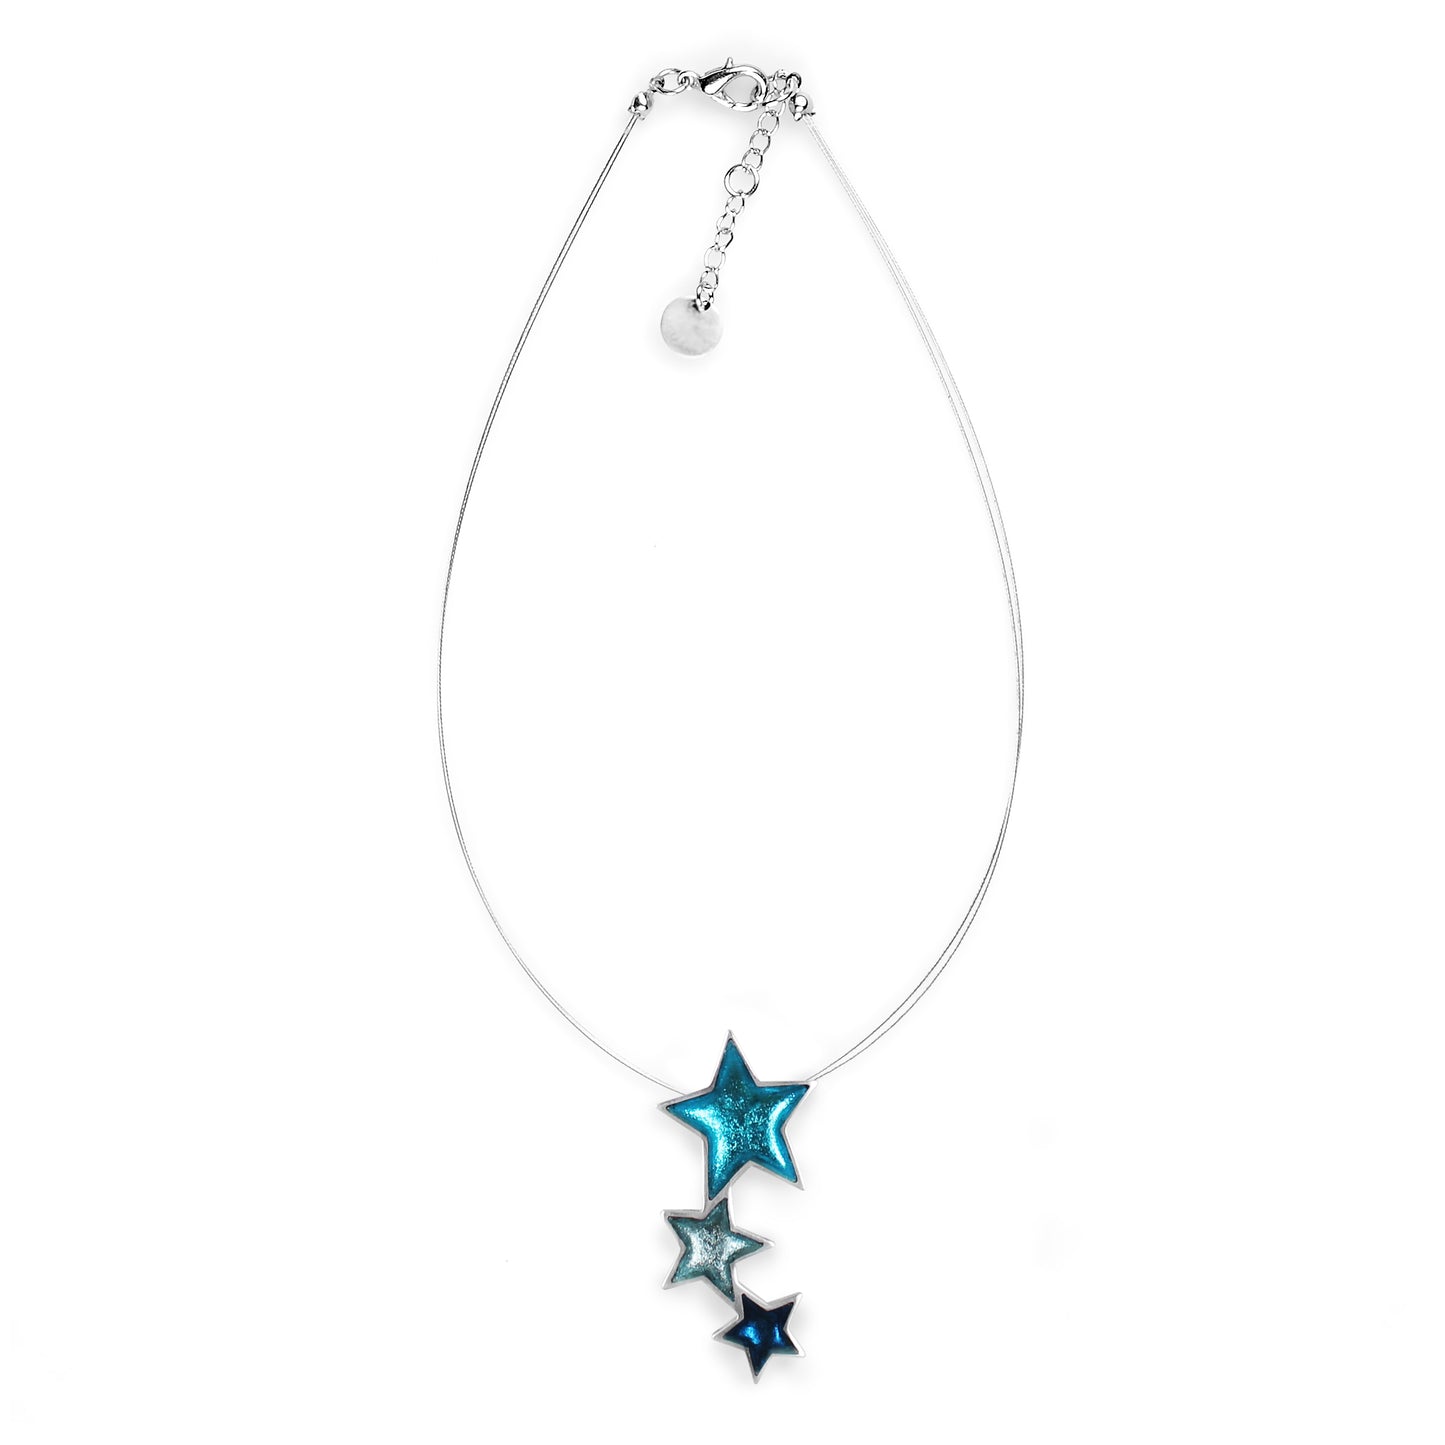 Teal Pewter Star Shiny Pendant